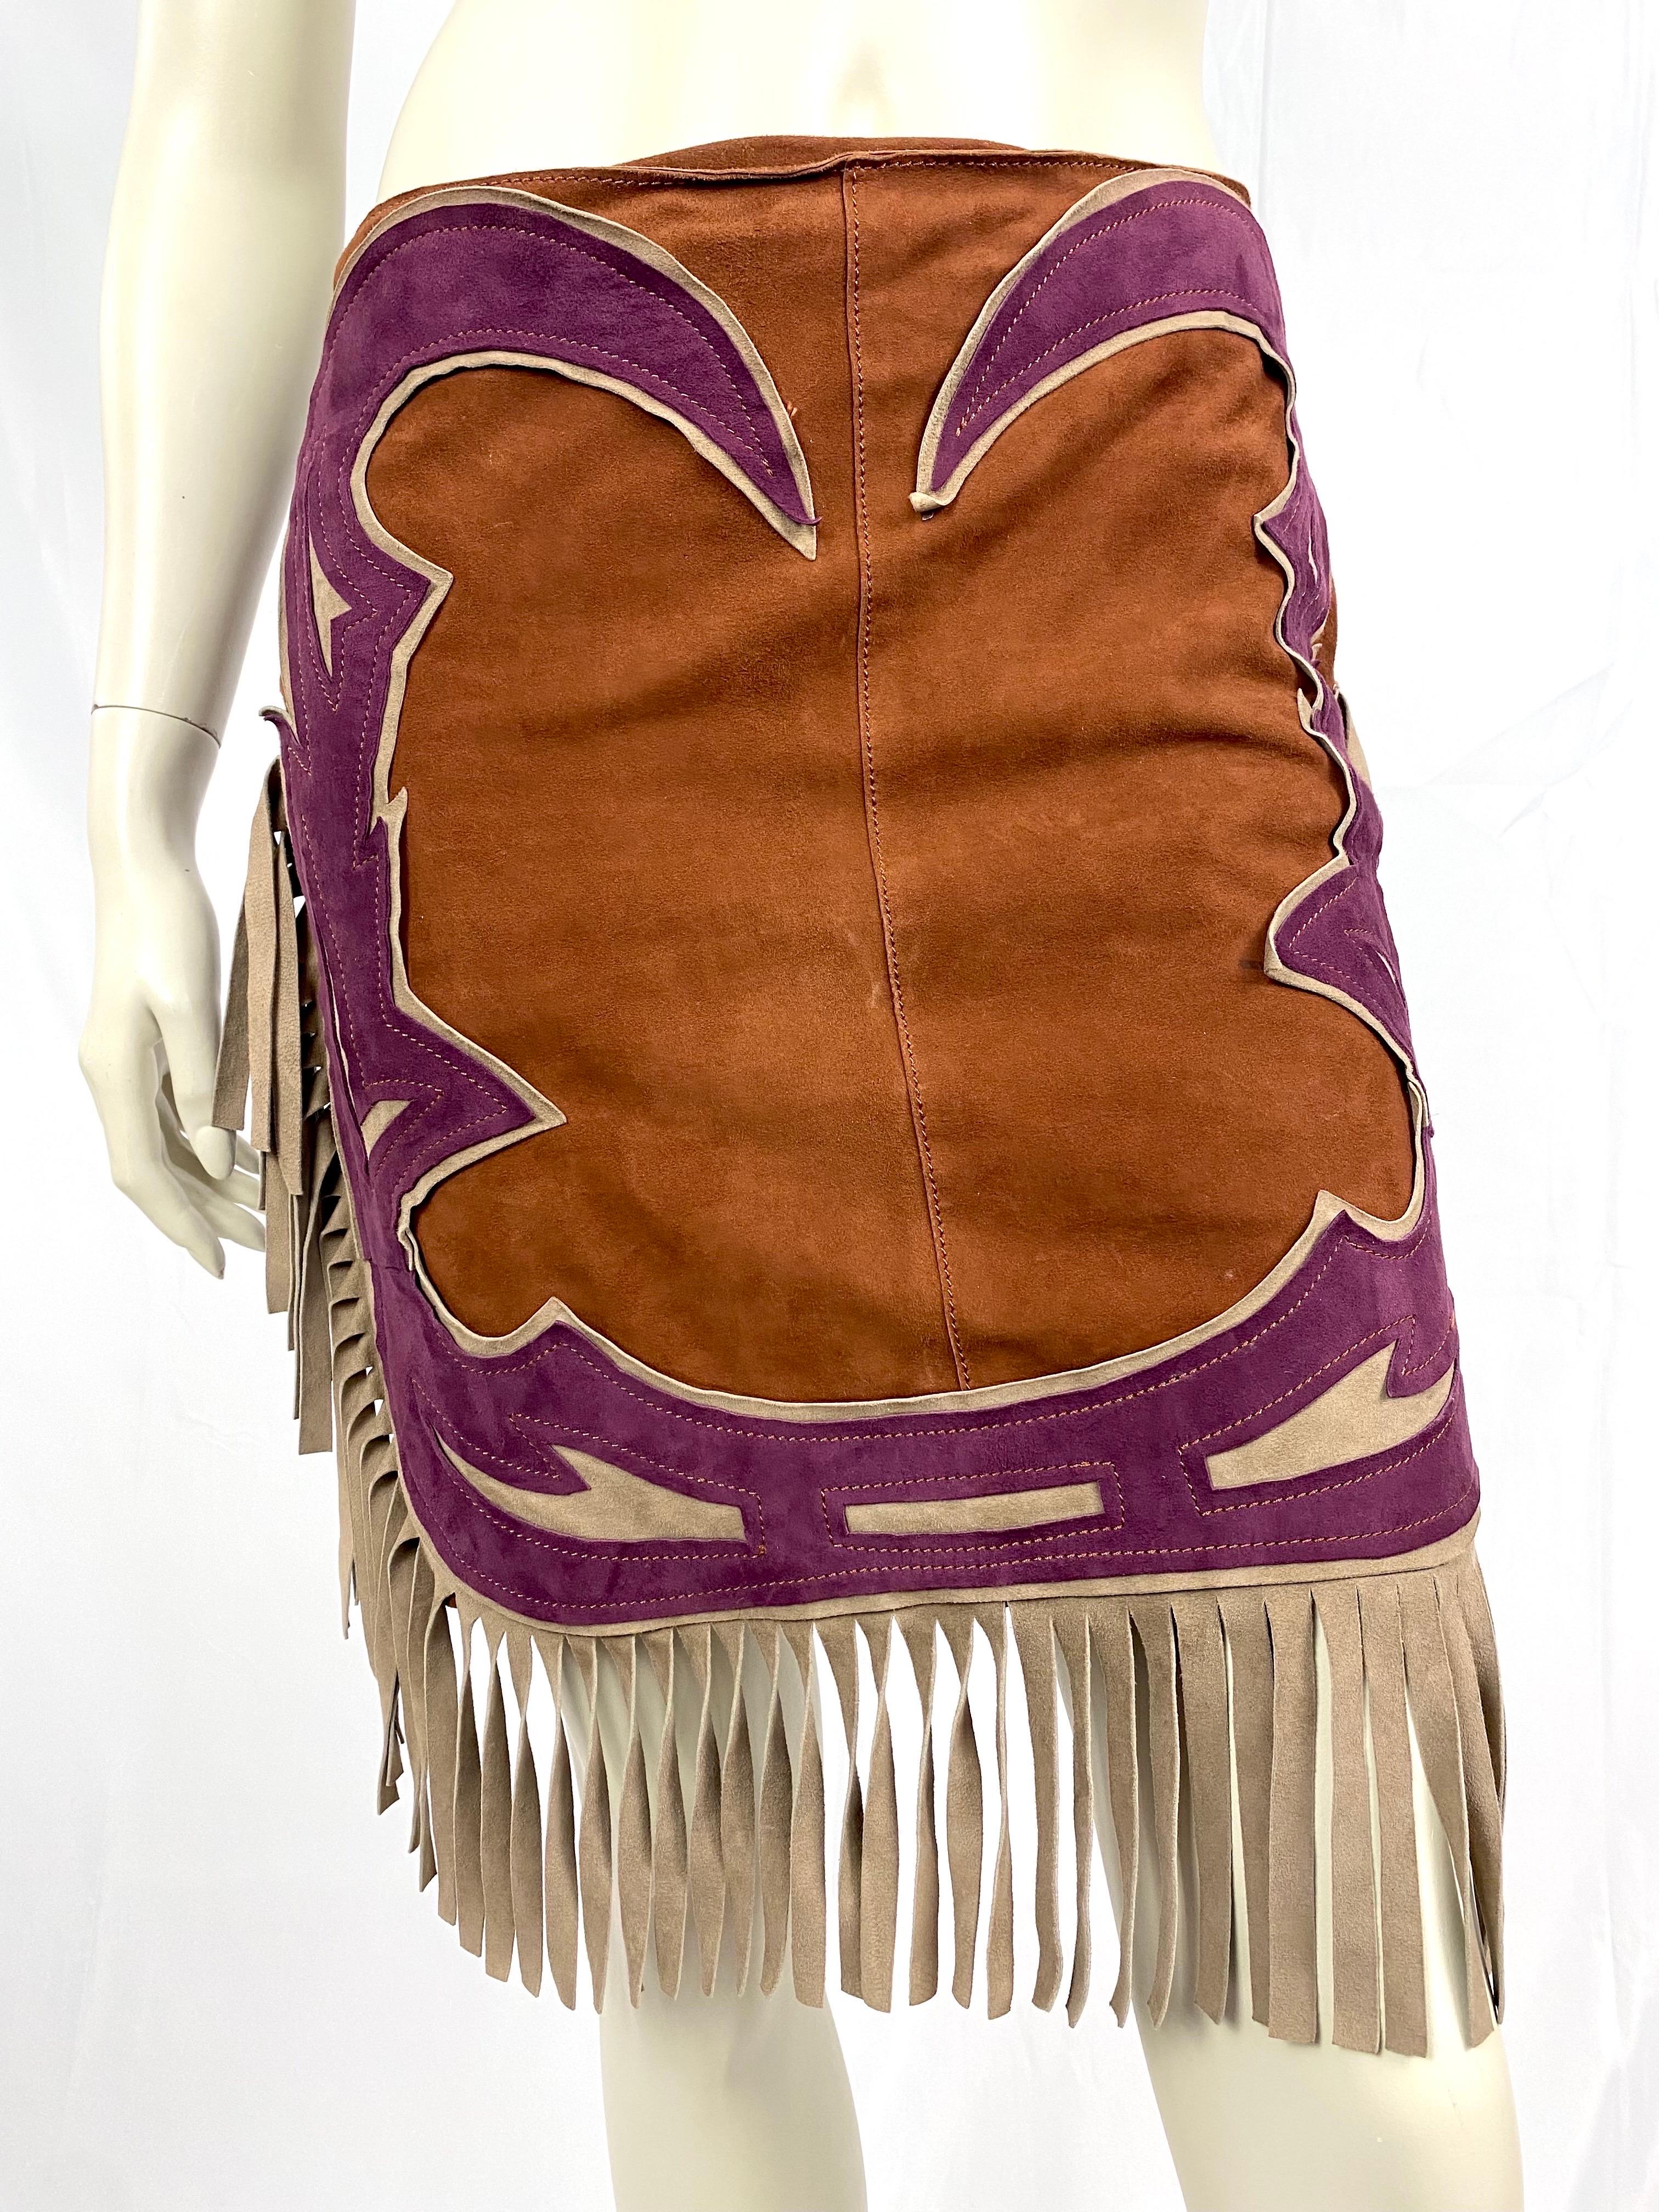 Vintage Philosophy by Alberta Ferretti fringed suede set For Sale 12